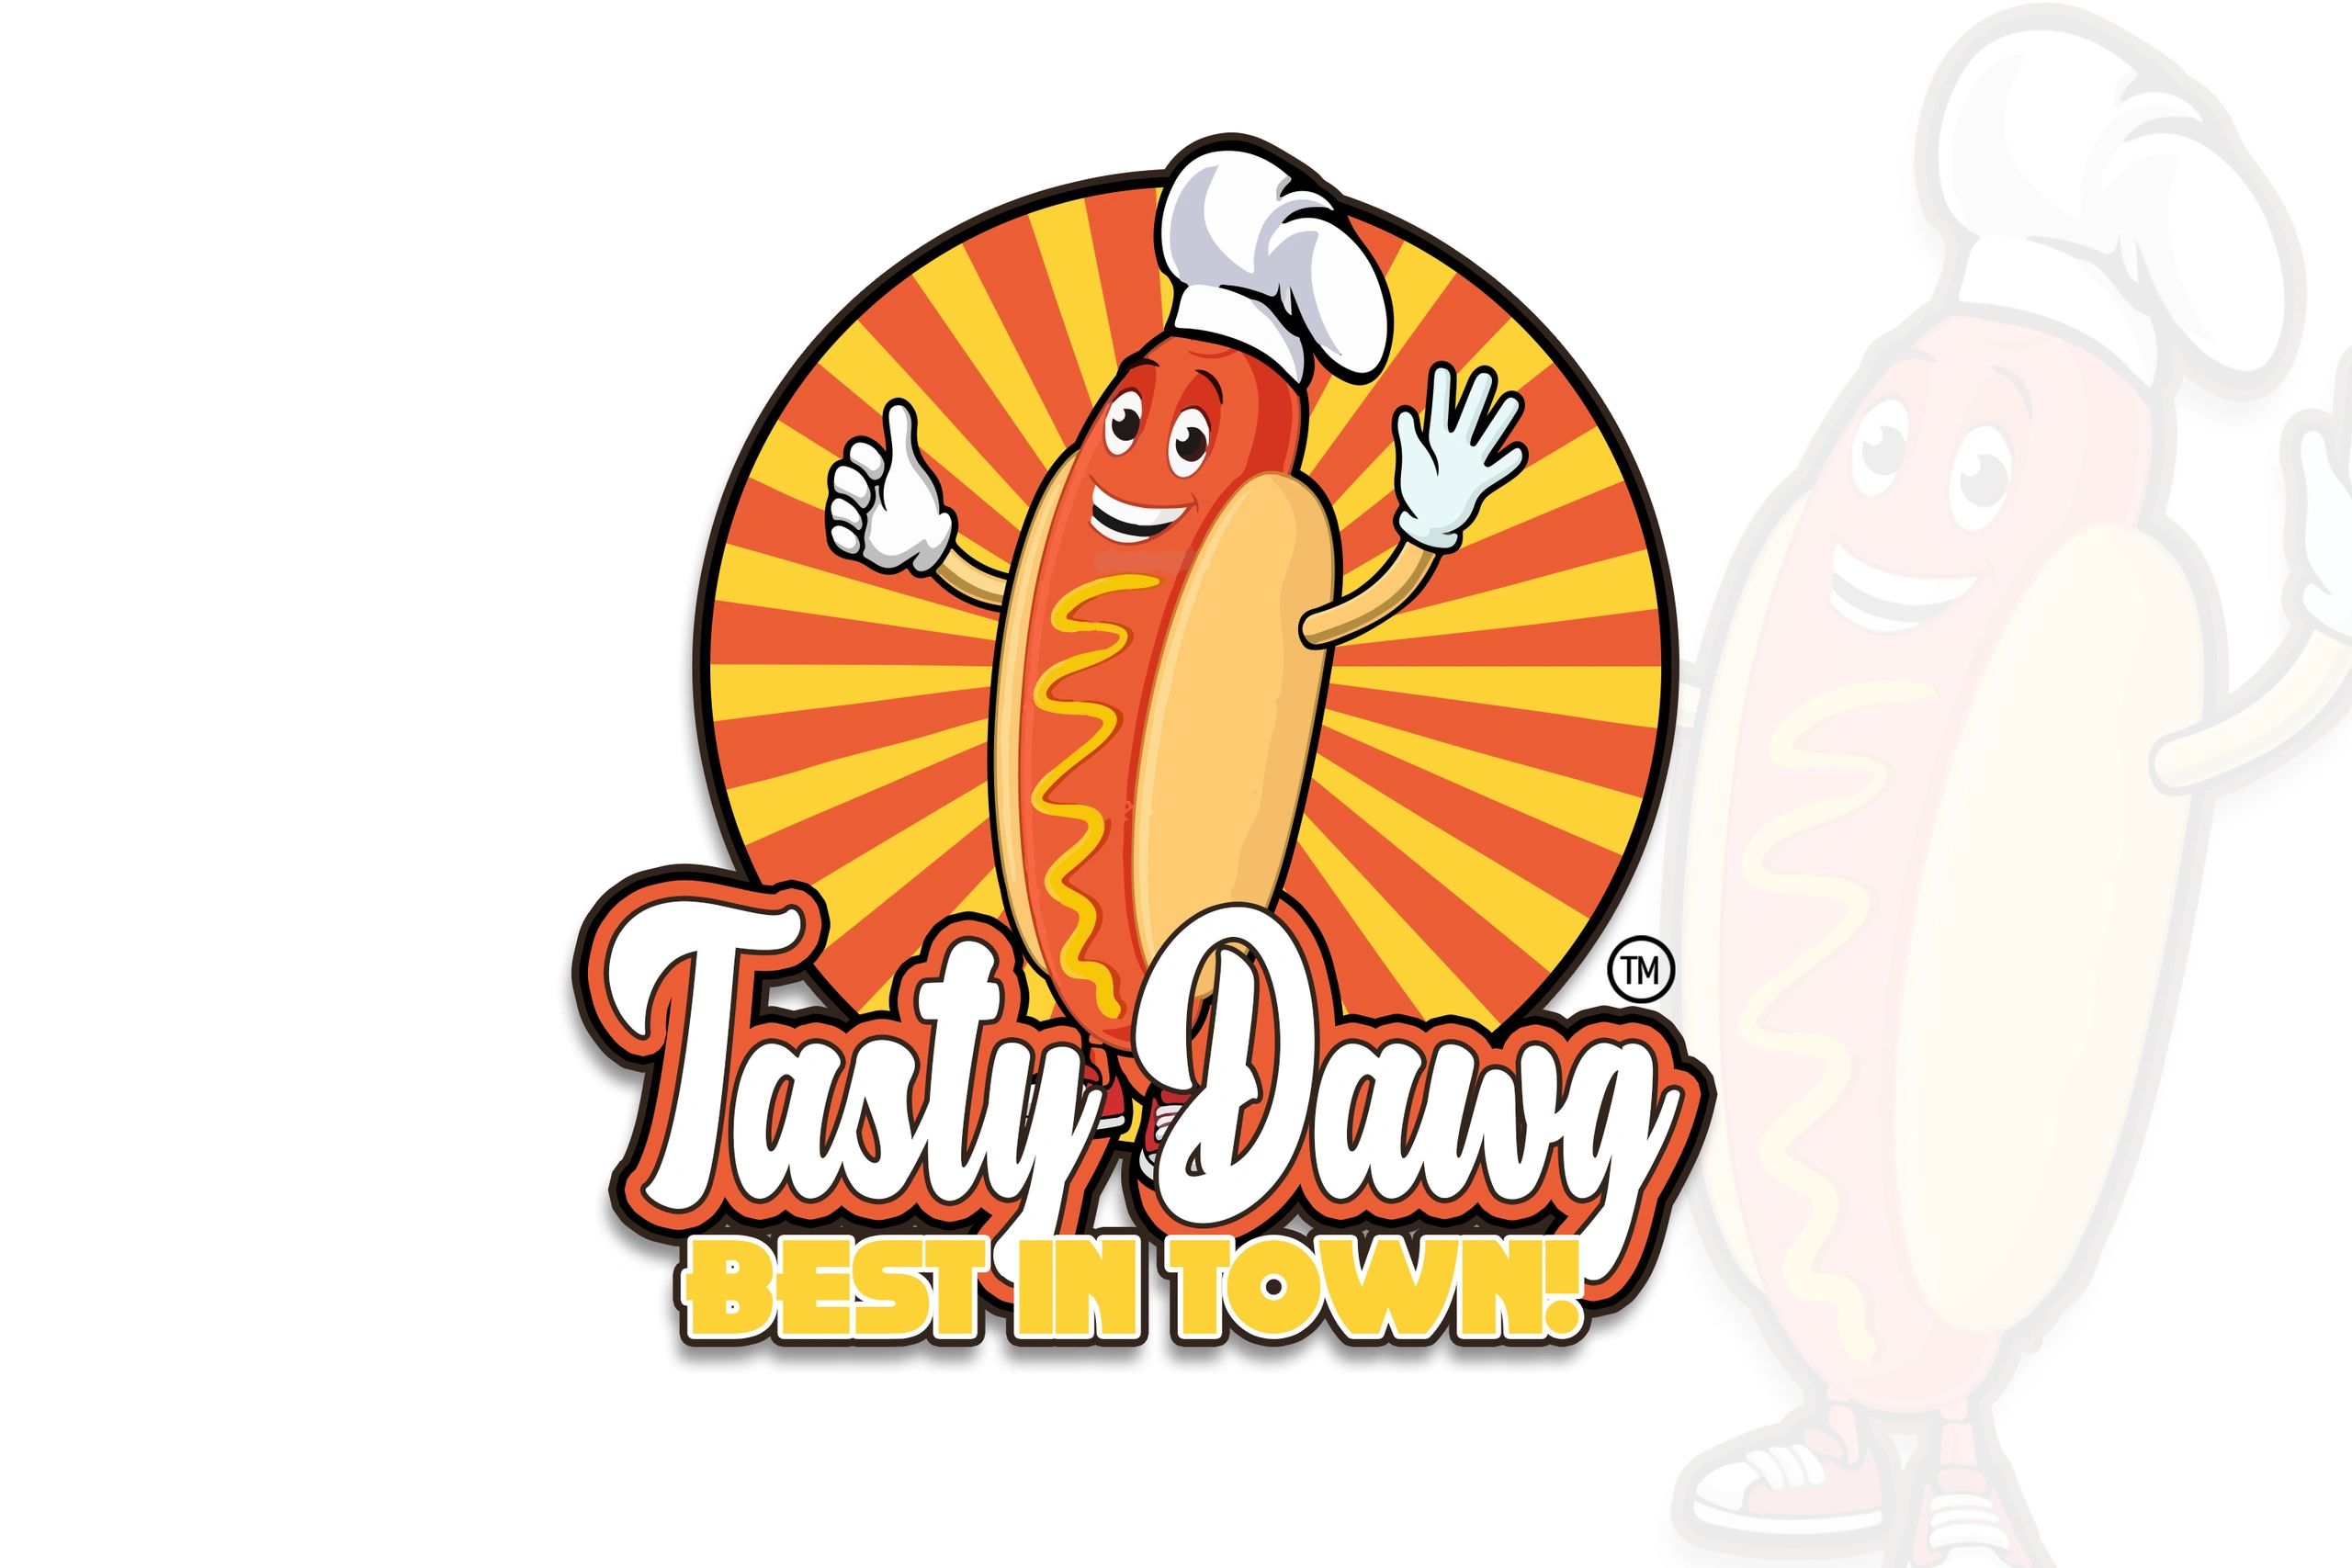 Tatsty Dawg Logo -  SM - all rights reserved